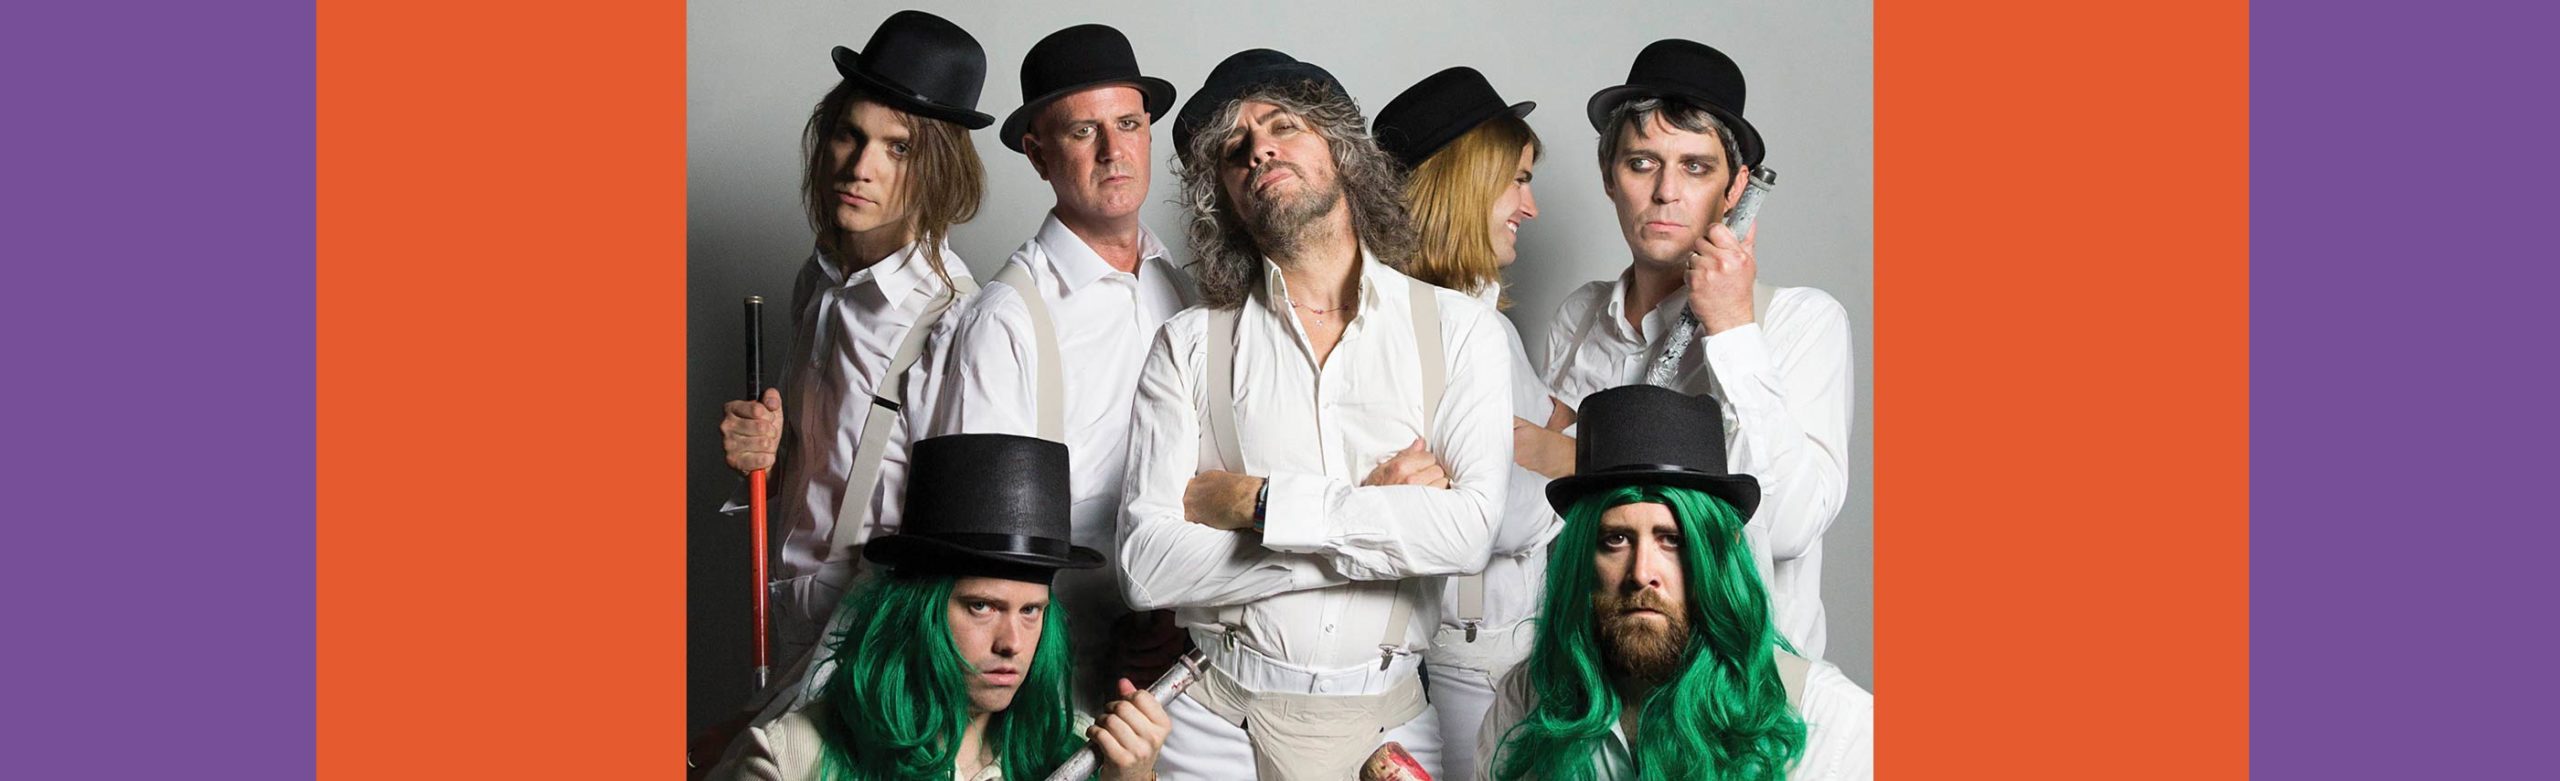 JUST ANNOUNCED: The Flaming Lips Will Rock the Blackfoot This Summer Image